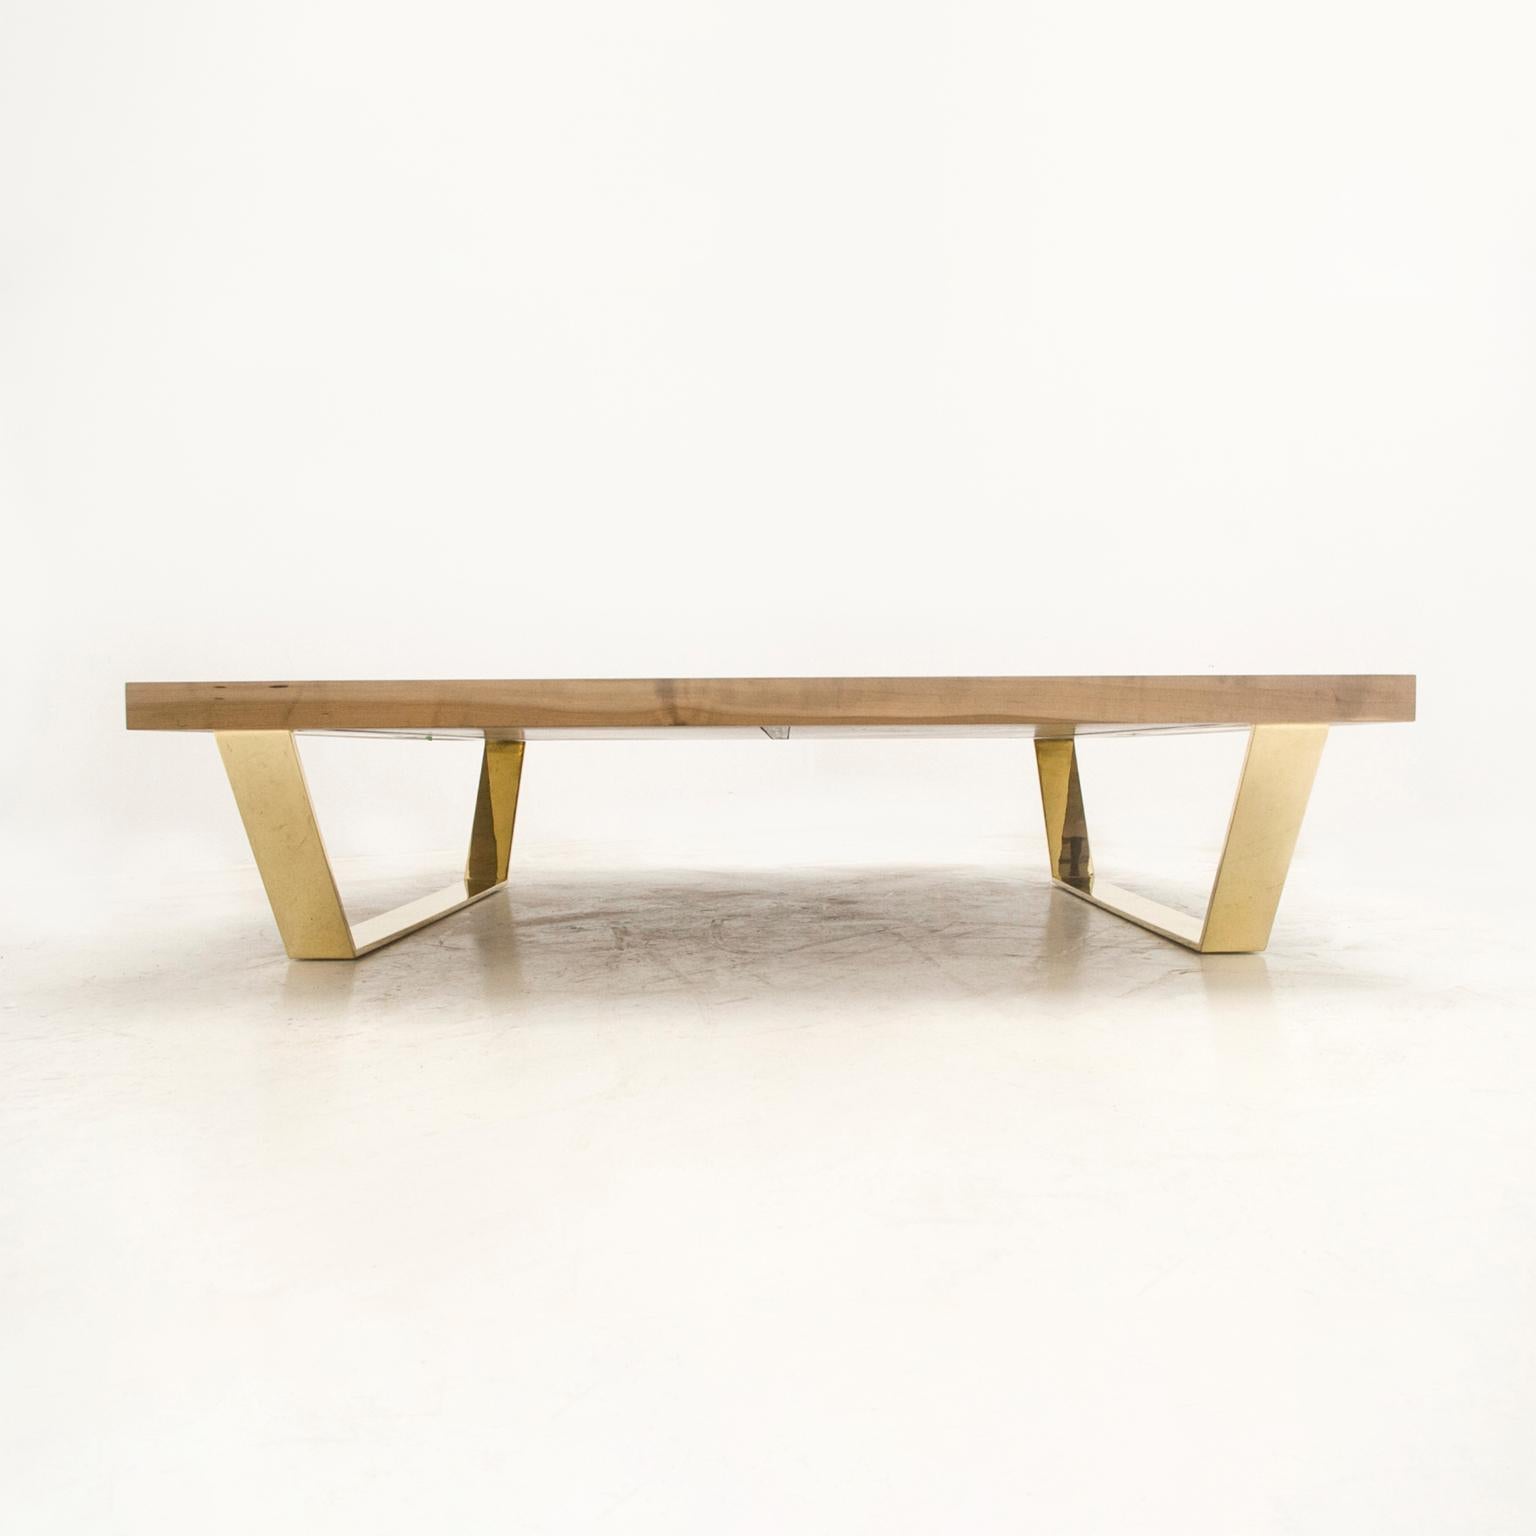 The 65 x 65 low table pairs a lacquer-sealed, solid oxidized domestic hardwood tabletop and a trapezoidal plated-steel leg. Metal stitch joints reinforce the hardwood.

STACKLAB’s controlled oxidation process naturally modifies the wood’s color,